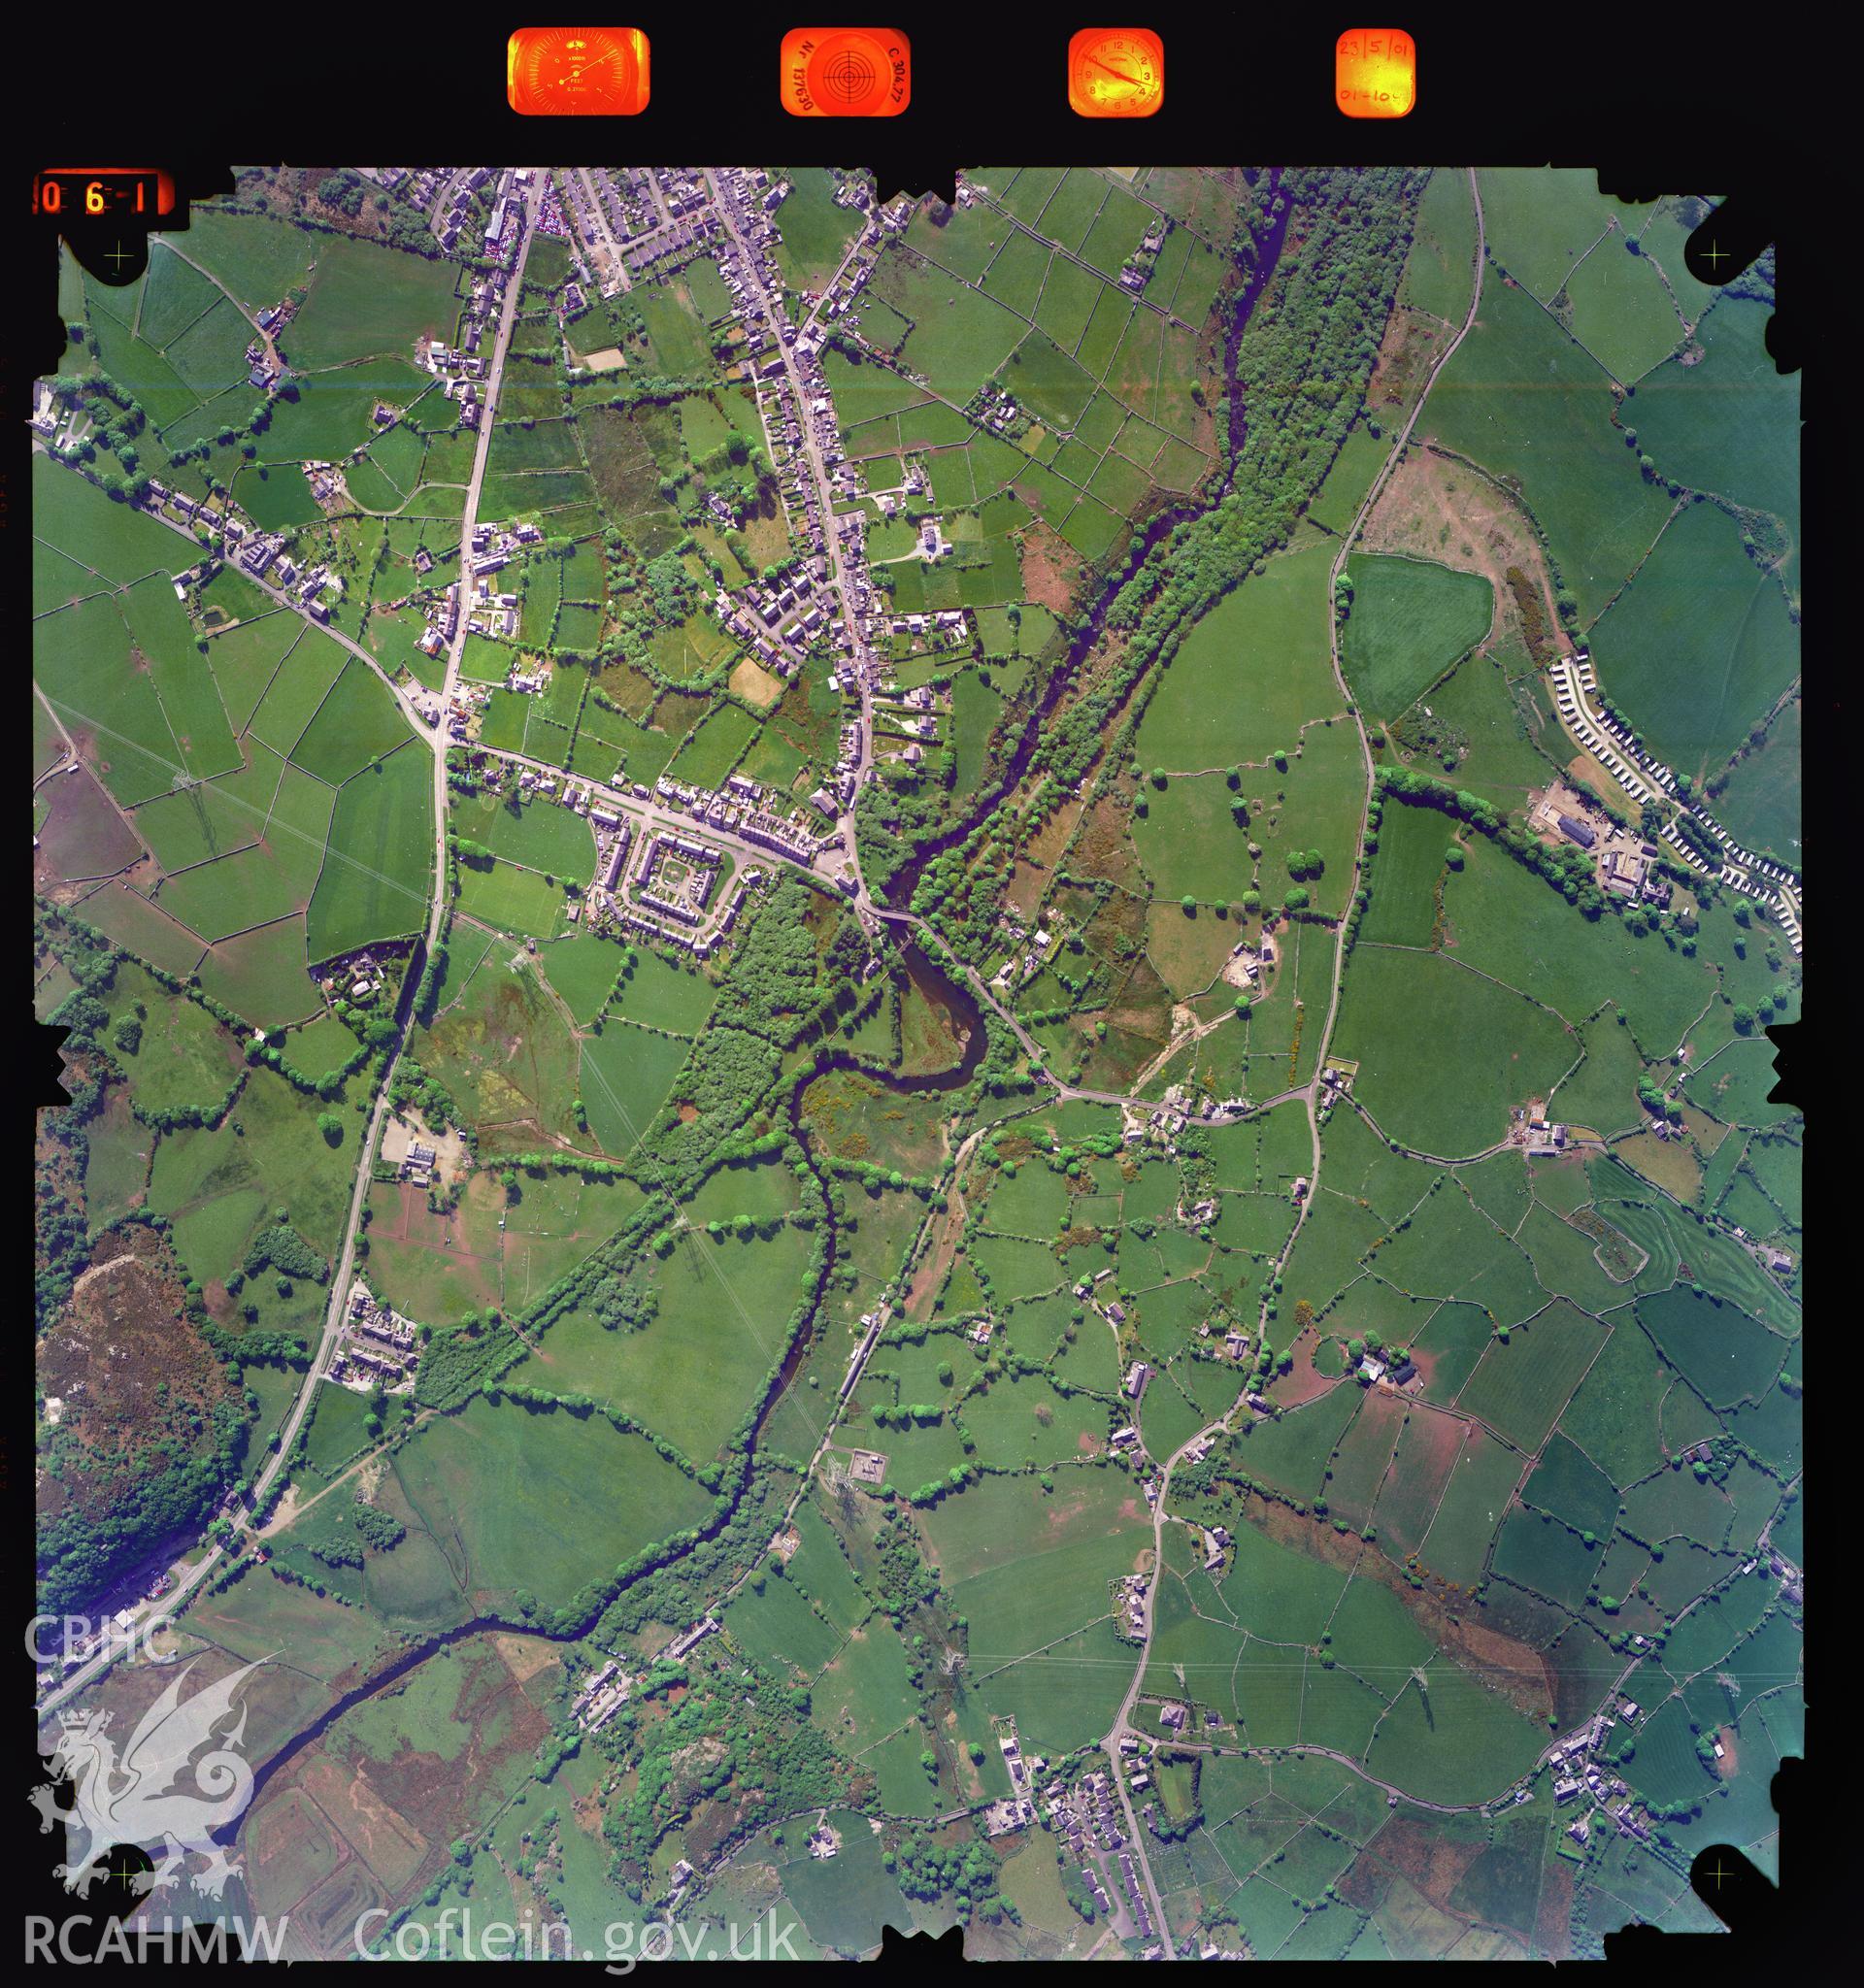 Digitized copy of an aerial photograph showing the Cwm Glo area, taken by Ordnance Survey, 2001.